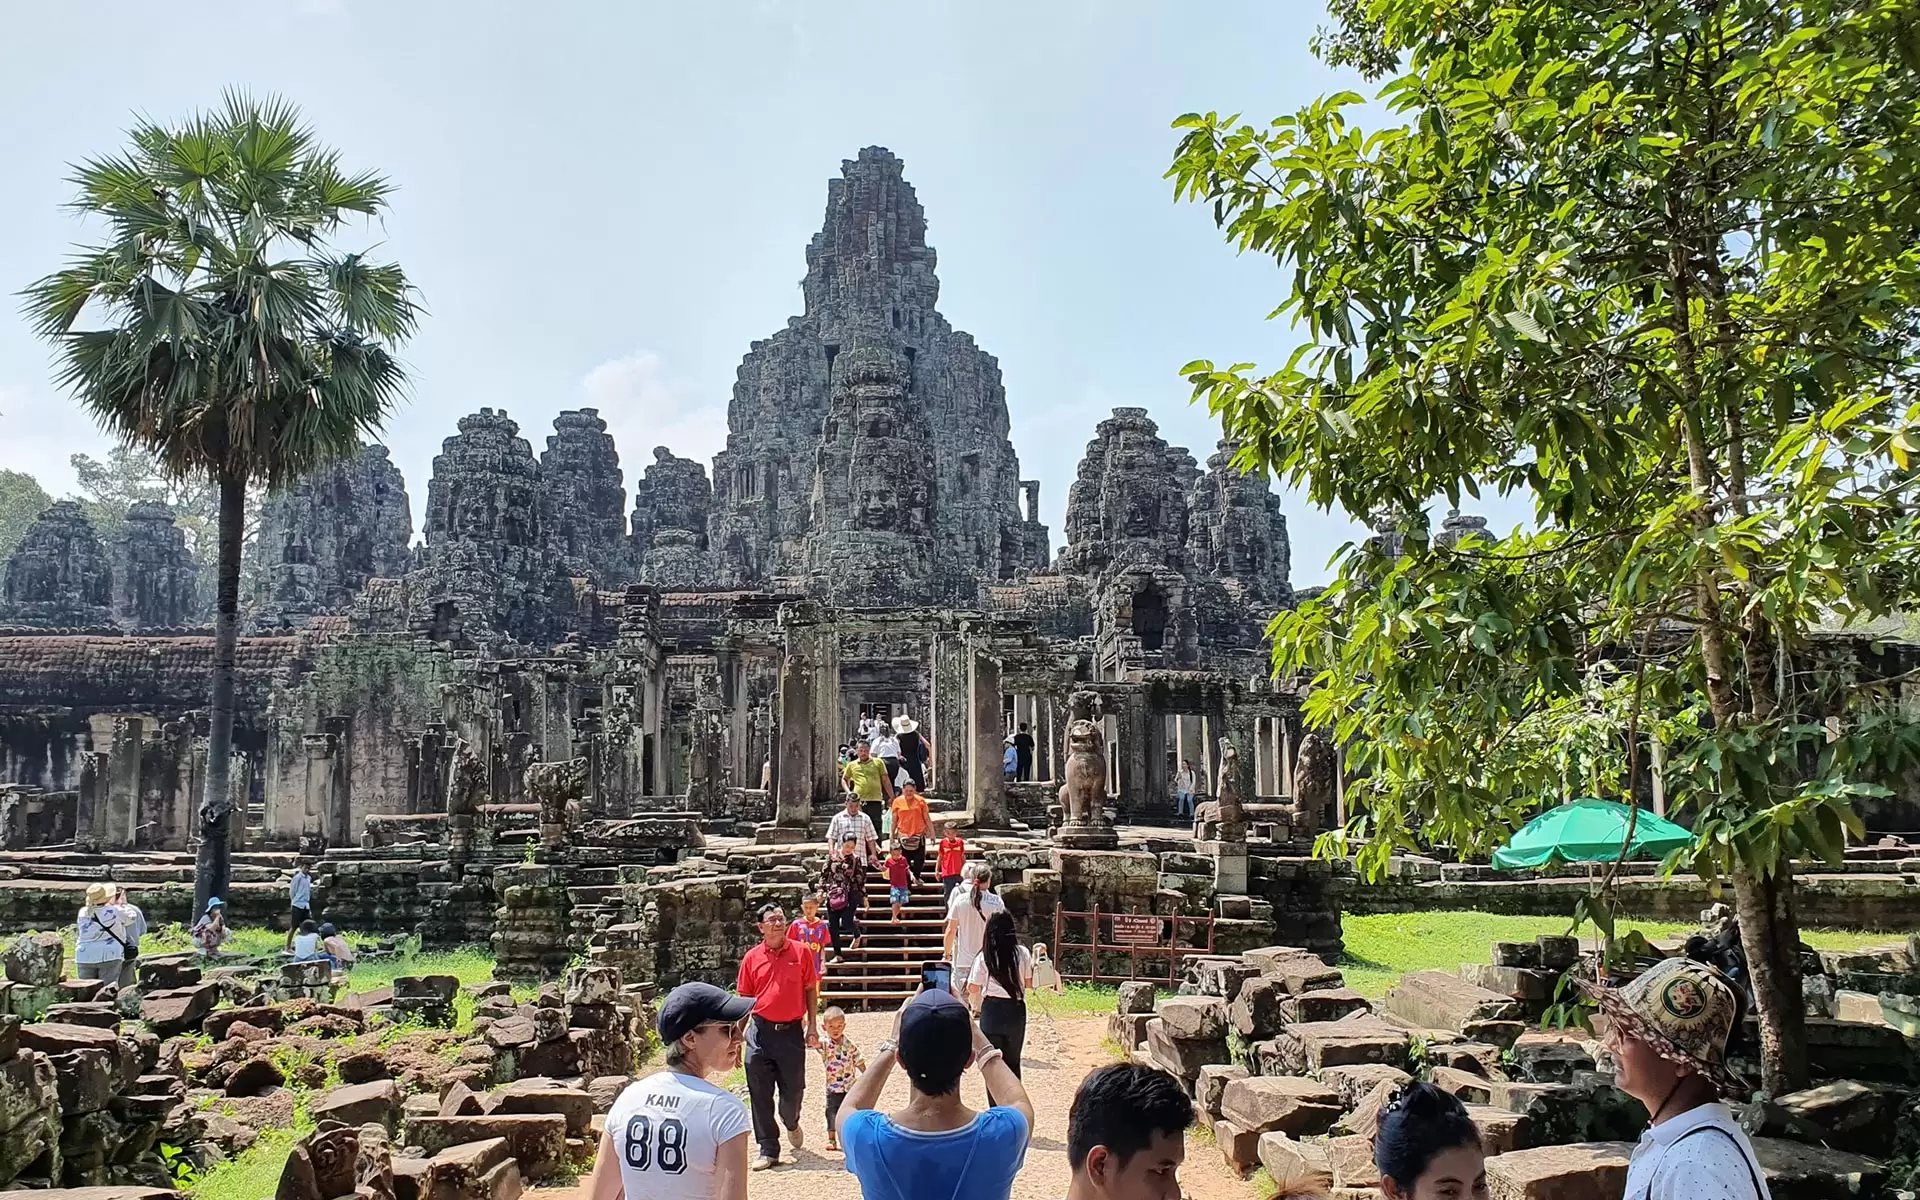 Bayon temple is in the heart of the ancient city of Angkor Thom